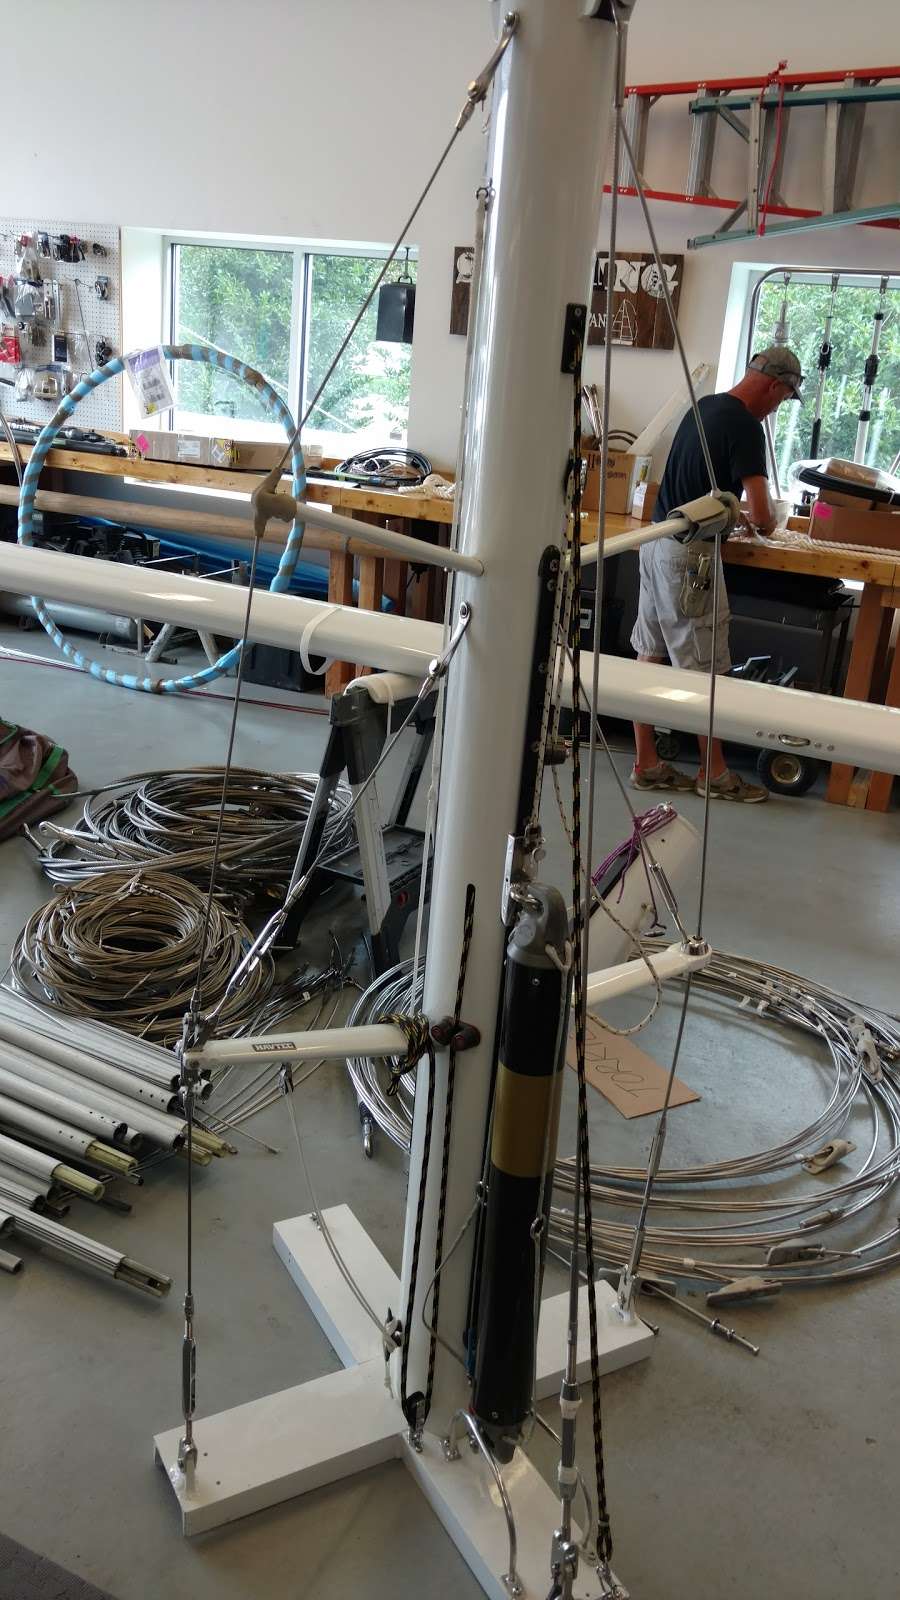 The Rigging Company | Bld, 7416 Edgewood Rd #1, Annapolis, MD 21403 | Phone: (443) 847-1004